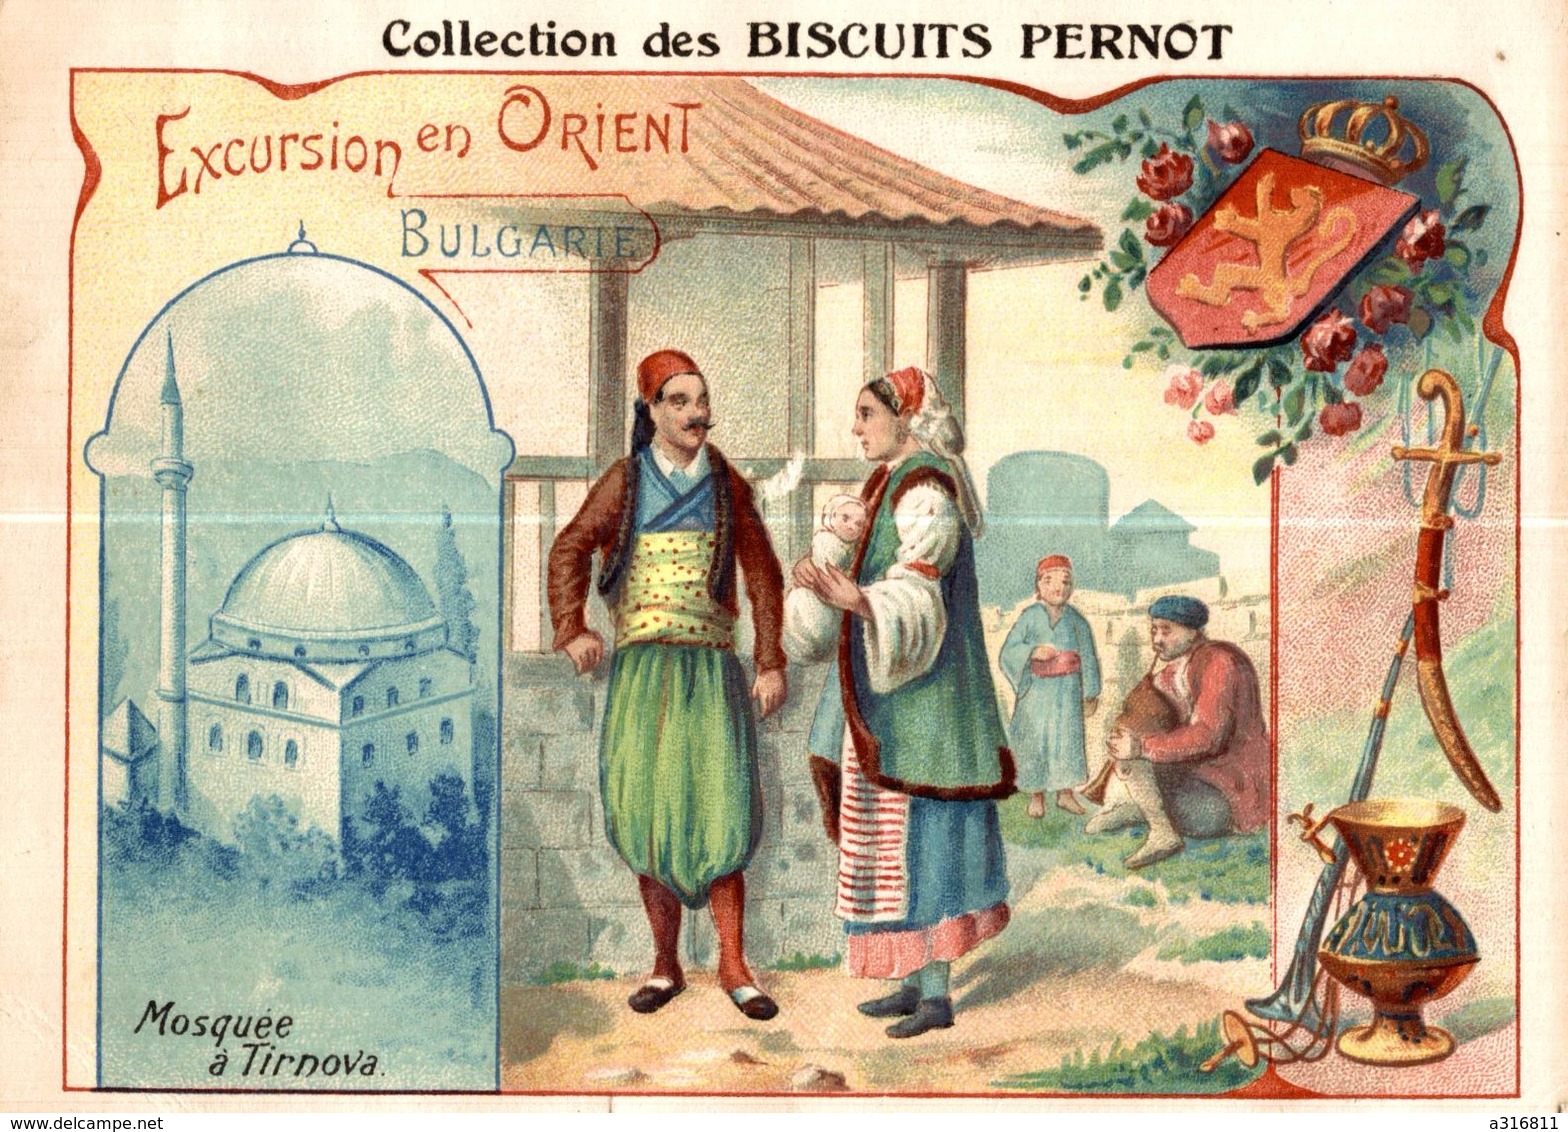 BISCUITS PERNOT   EXCURSION EN ORIENT  BULGARIE - Pernot